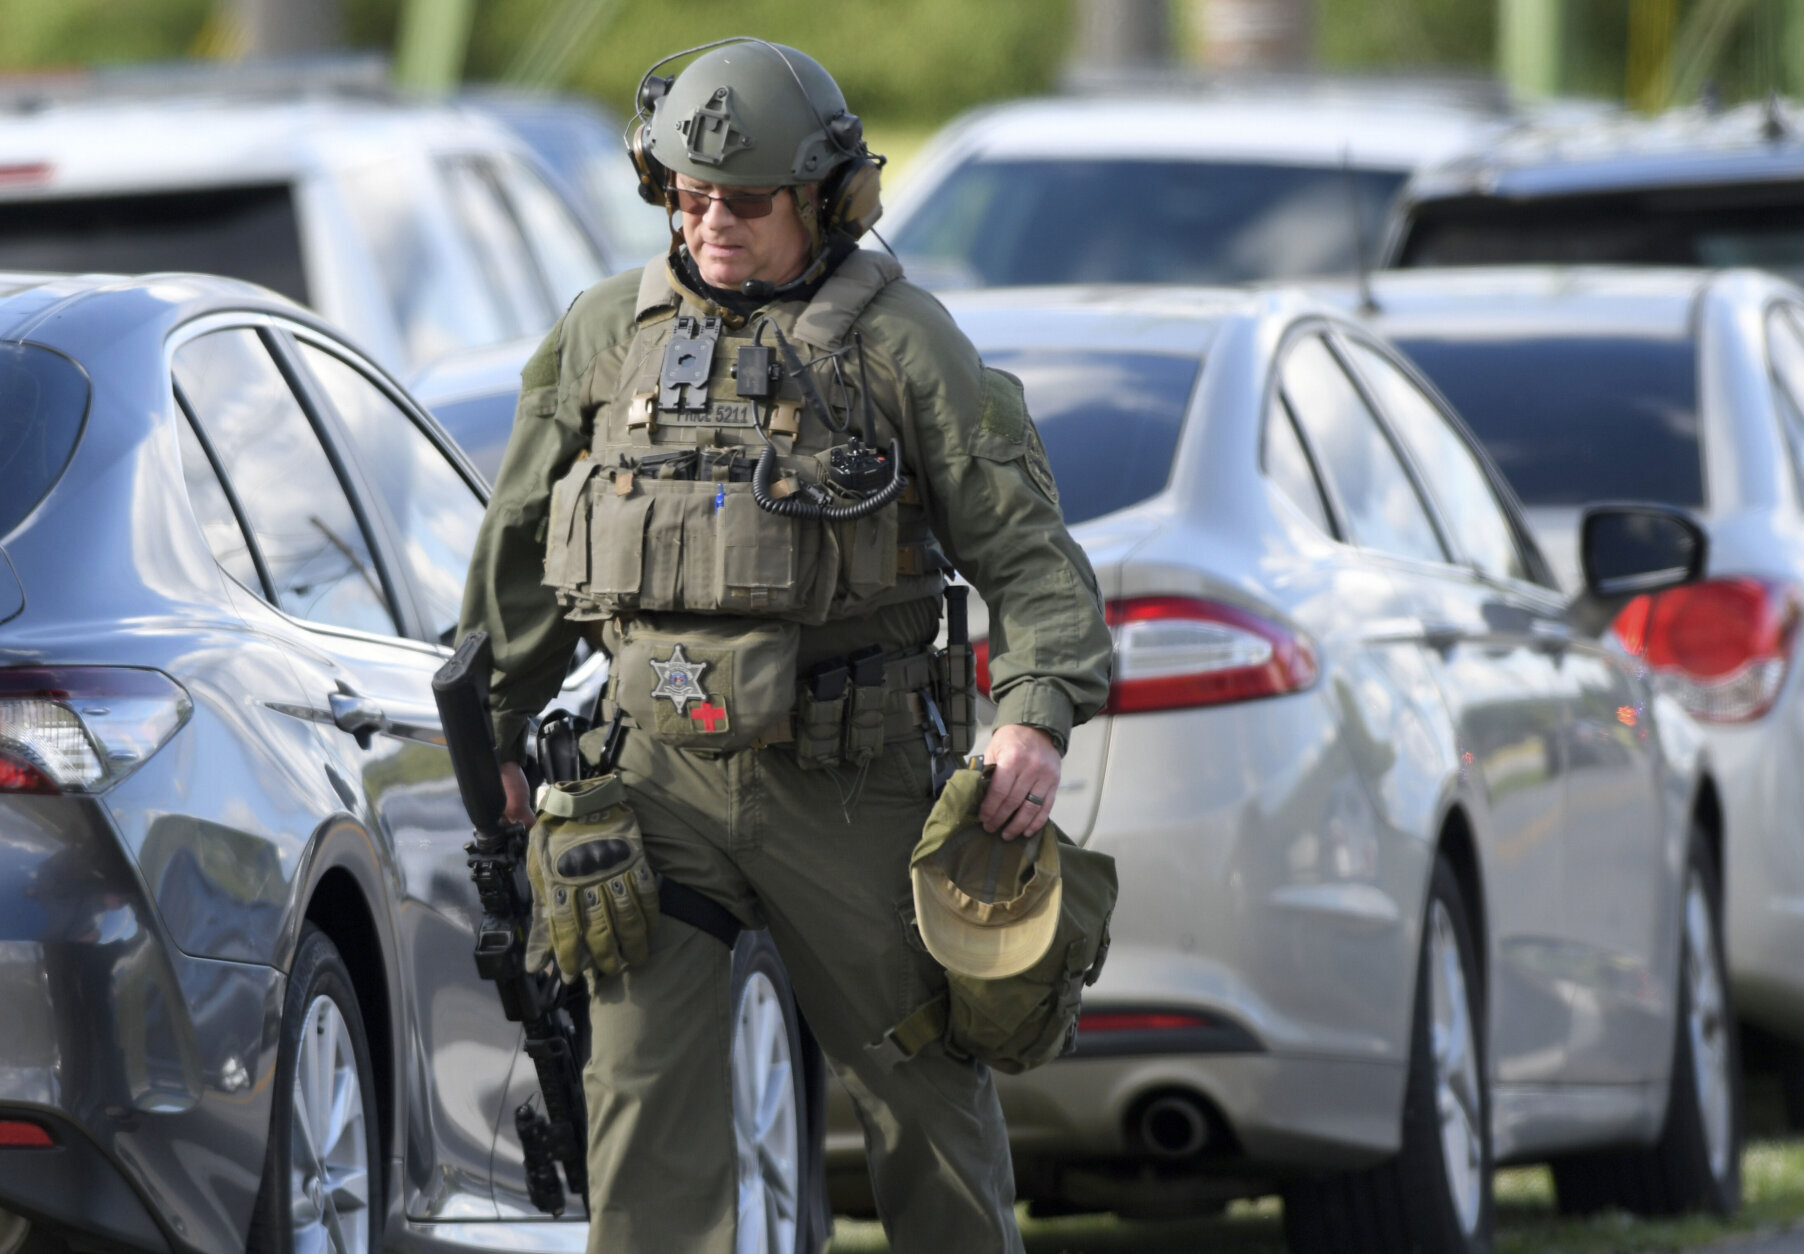 A tactical police officer walks near where a man opened fire on a business, killing three people before the suspect and a police officer were injured in a gun battle, authorities said in Smithsburg, Maryland, Thursday, June 9, 2022 County (Md.) Sheriff's Office said in a press release that three victims were found dead at Columbia Machine Inc.  and a fourth victim was seriously injured.  (AP Photo/Steve Ruark)